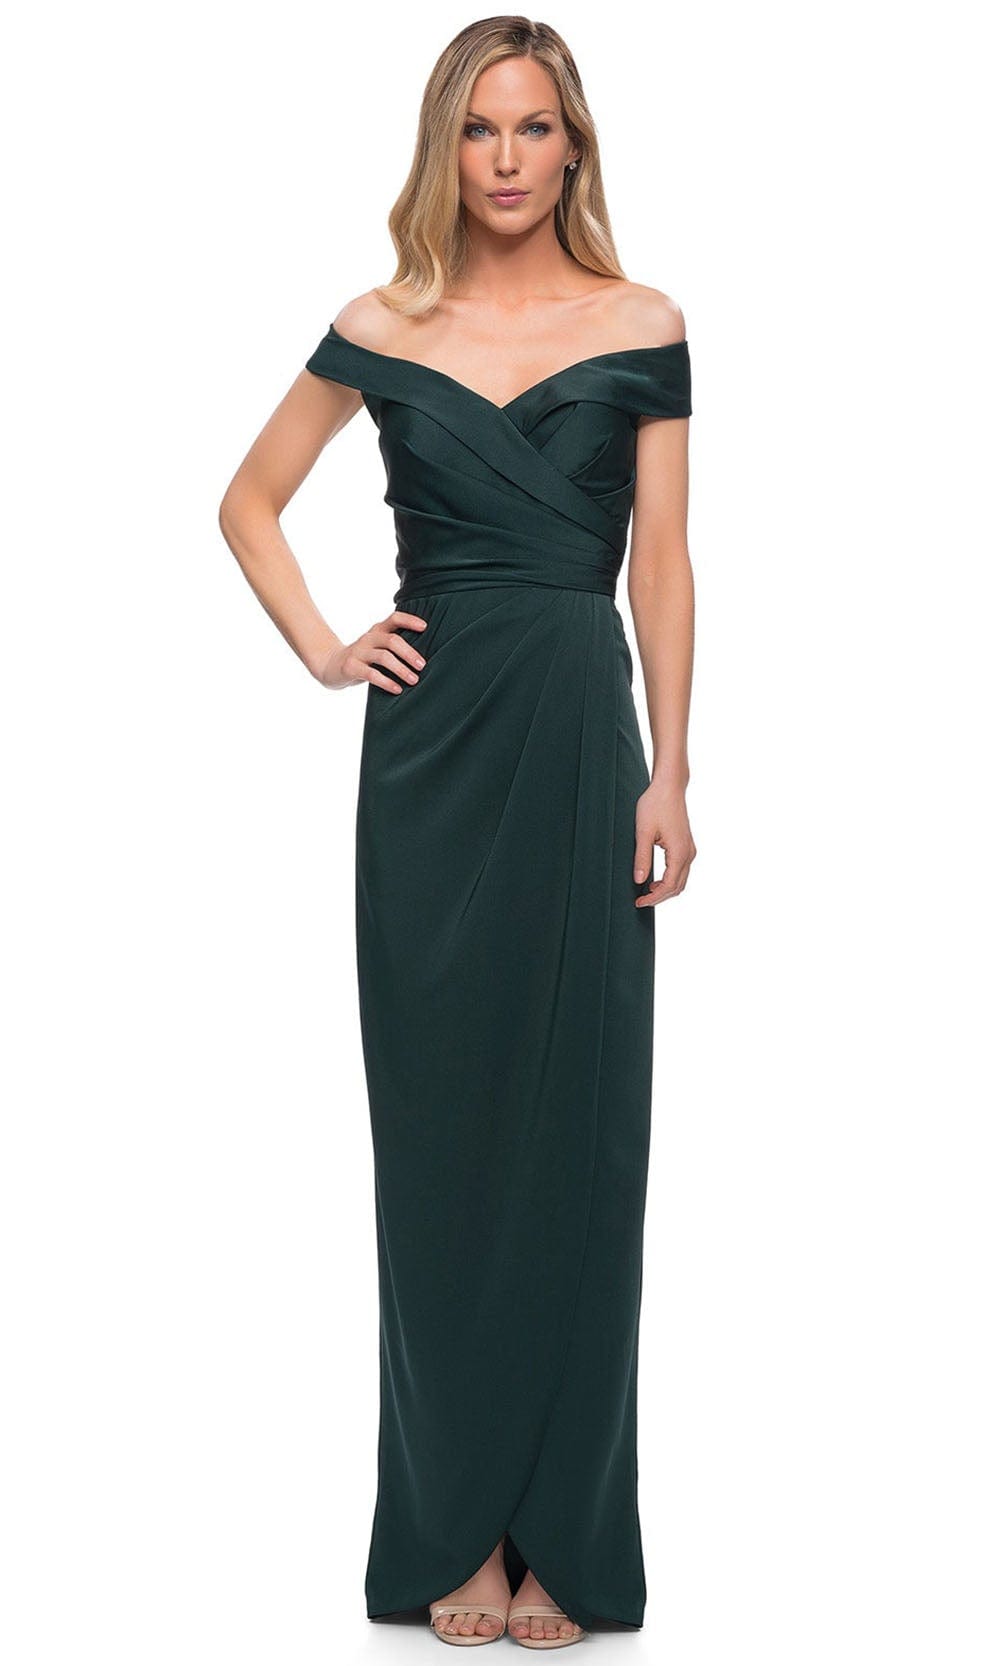 La Femme 25206 - Ruched Cap Sleeved Long Jersey Dress Special Occasion Dress 0 / Emerald